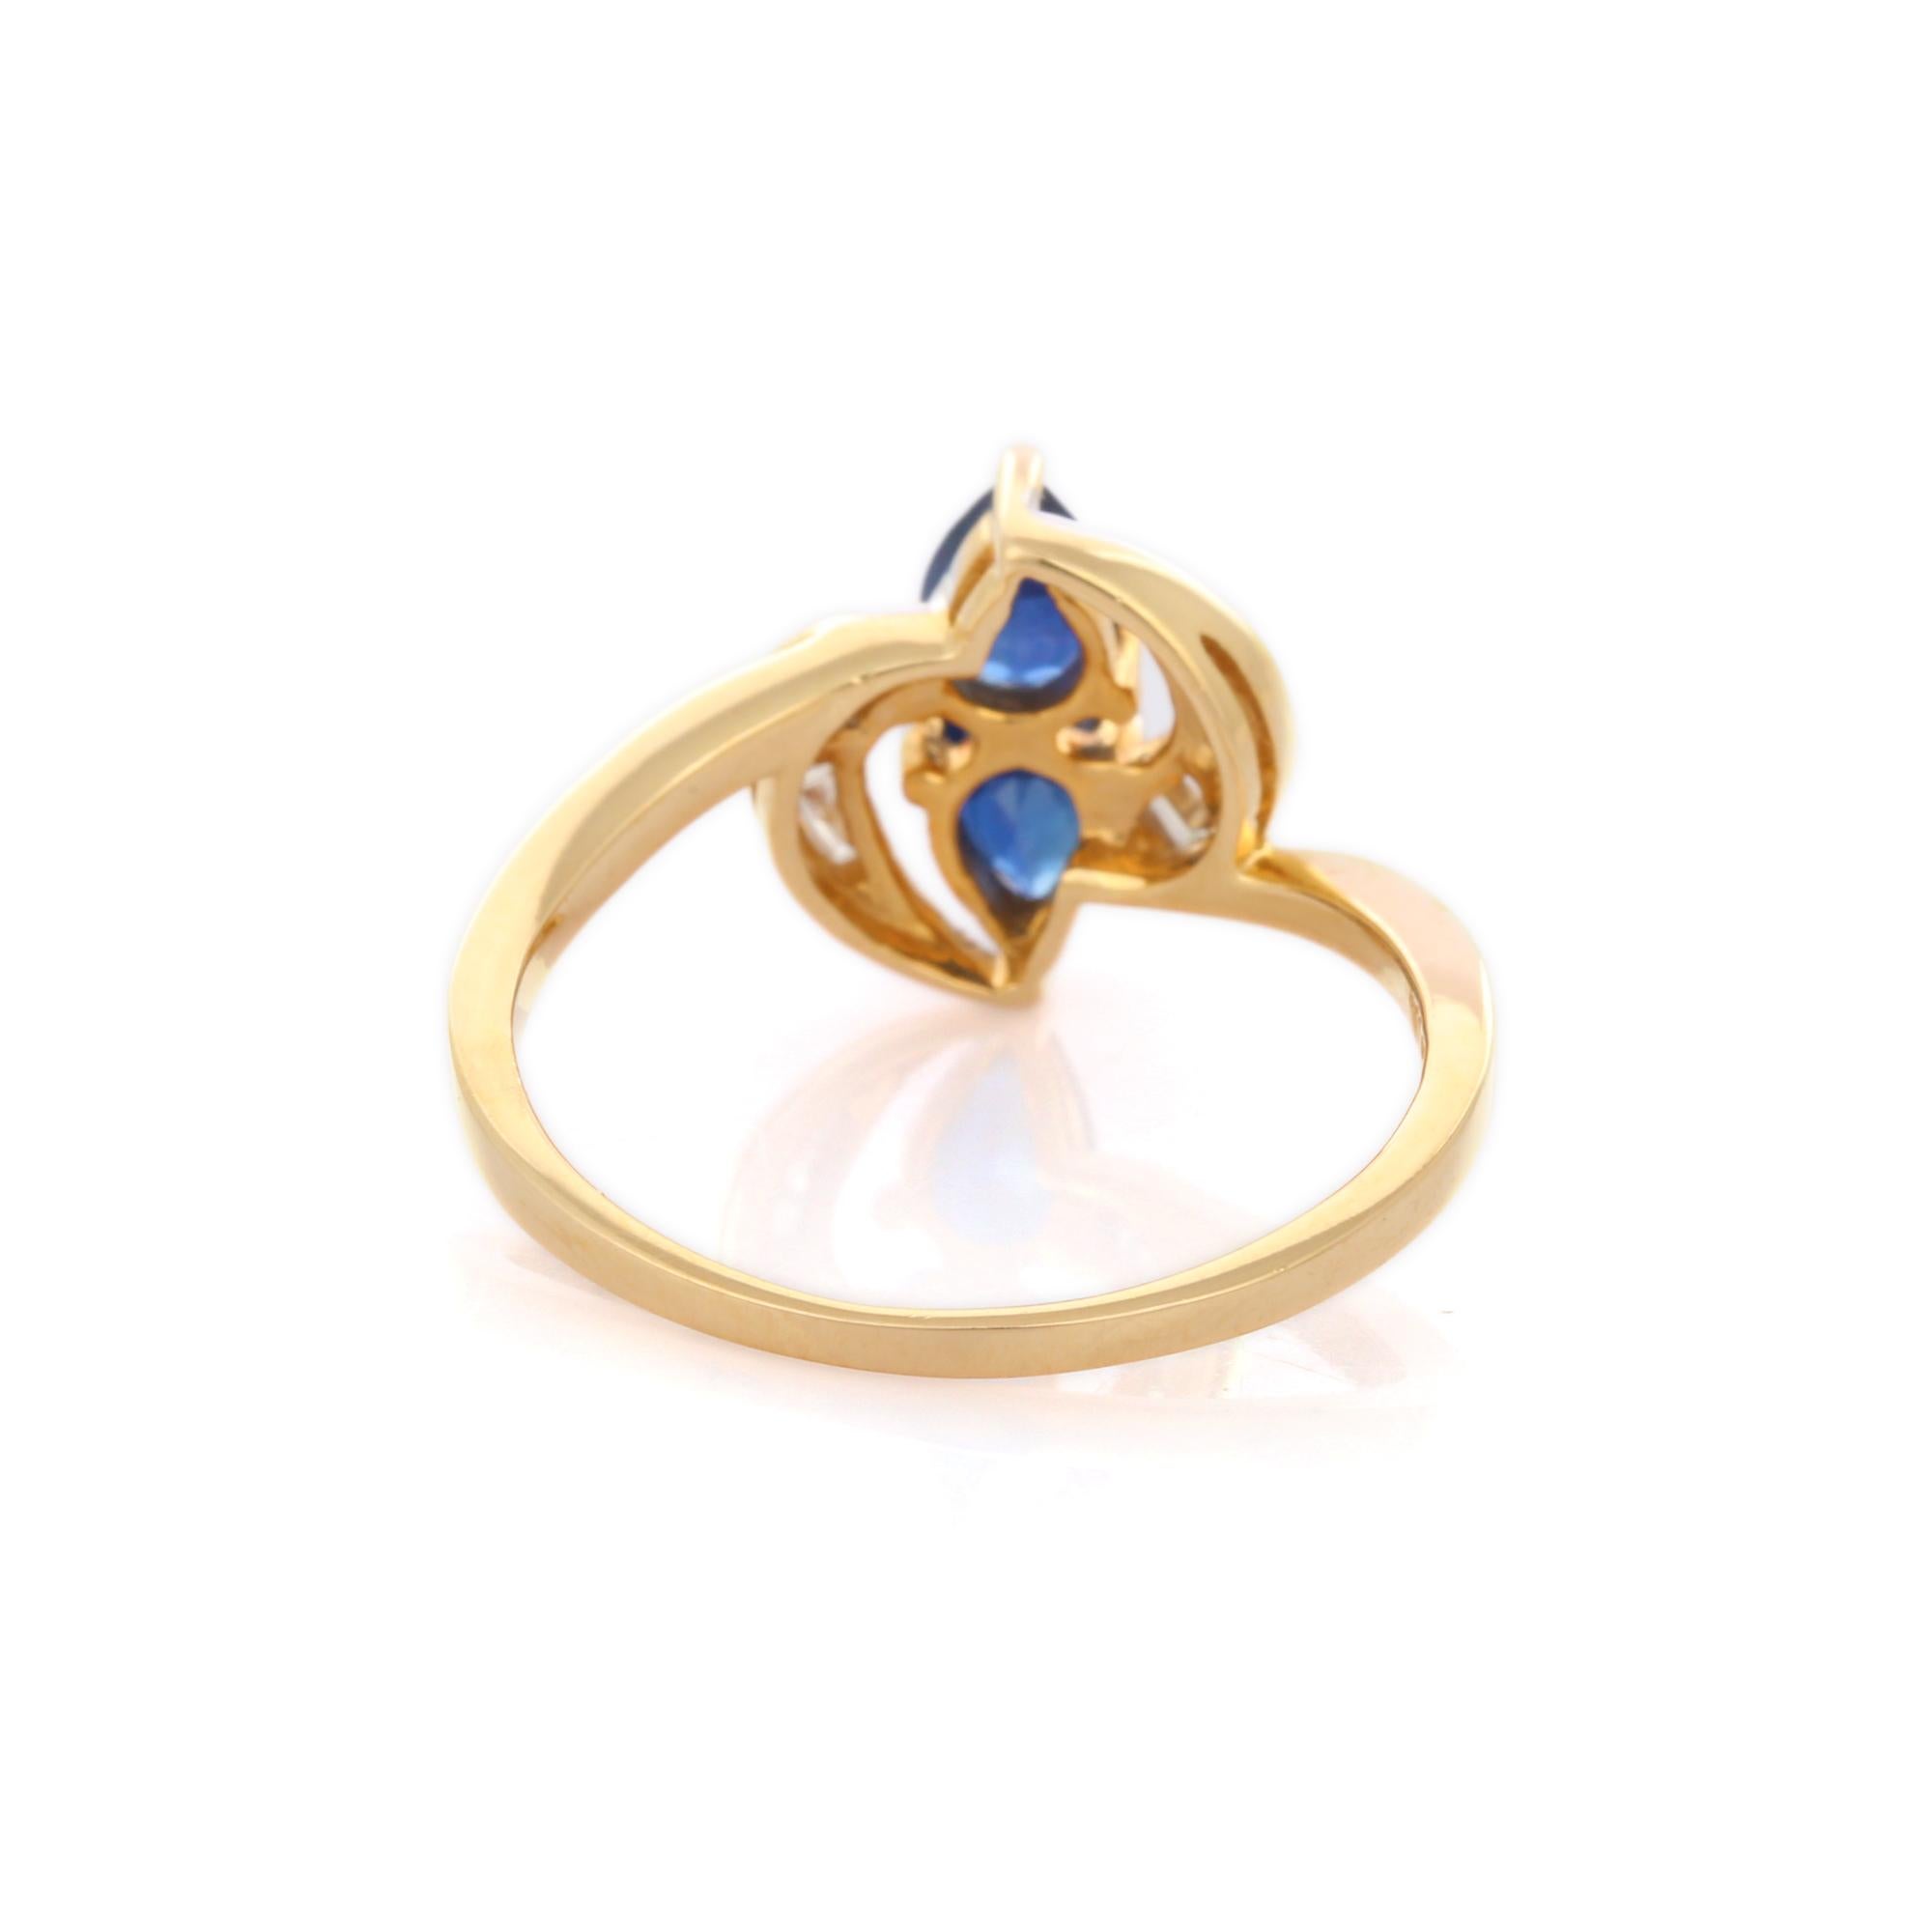 For Sale:  Natural Blue Sapphire Bridal Ring in 18K Yellow Gold with Diamonds 4